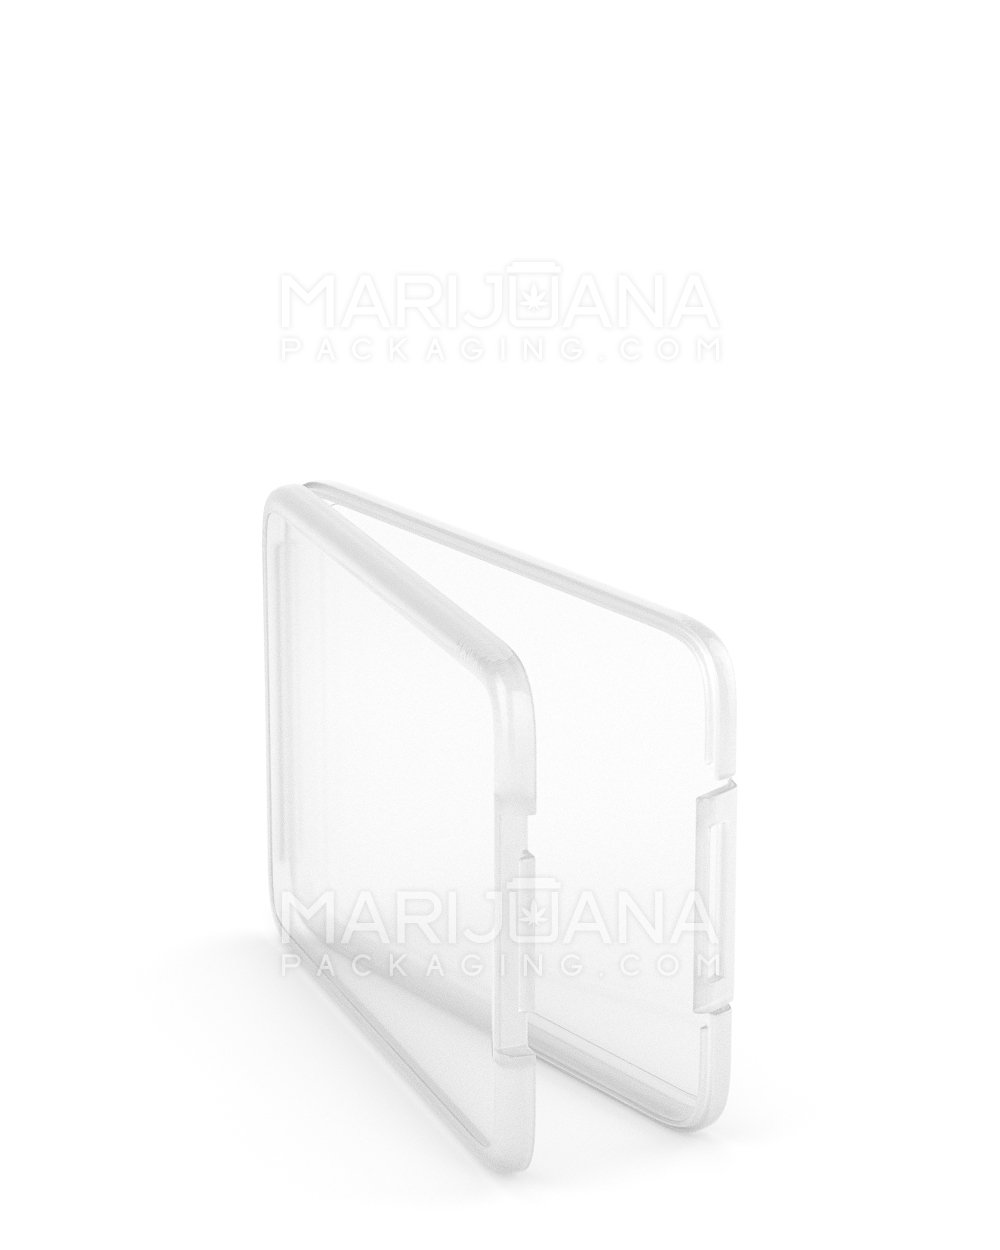 Hinged Lid Slim Shatter Container | 4.5 mm - Clear Plastic - 1000 Count - 4